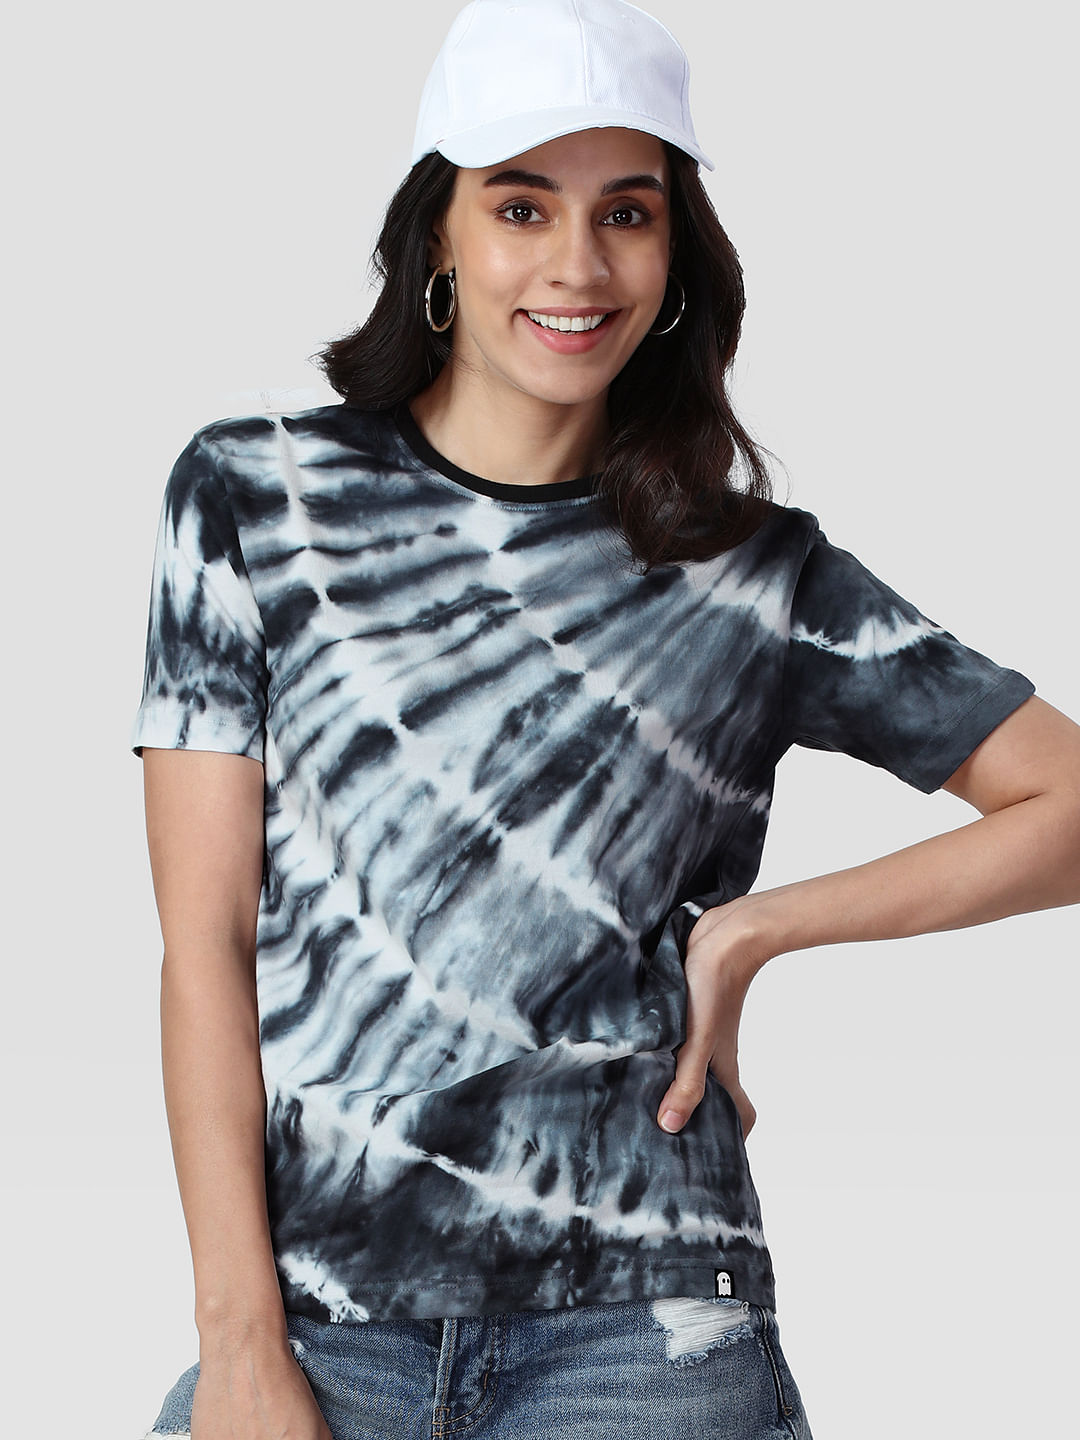 Buy Tie Dye (Diagonal Grey) T-Shirts online at The Souled Store.